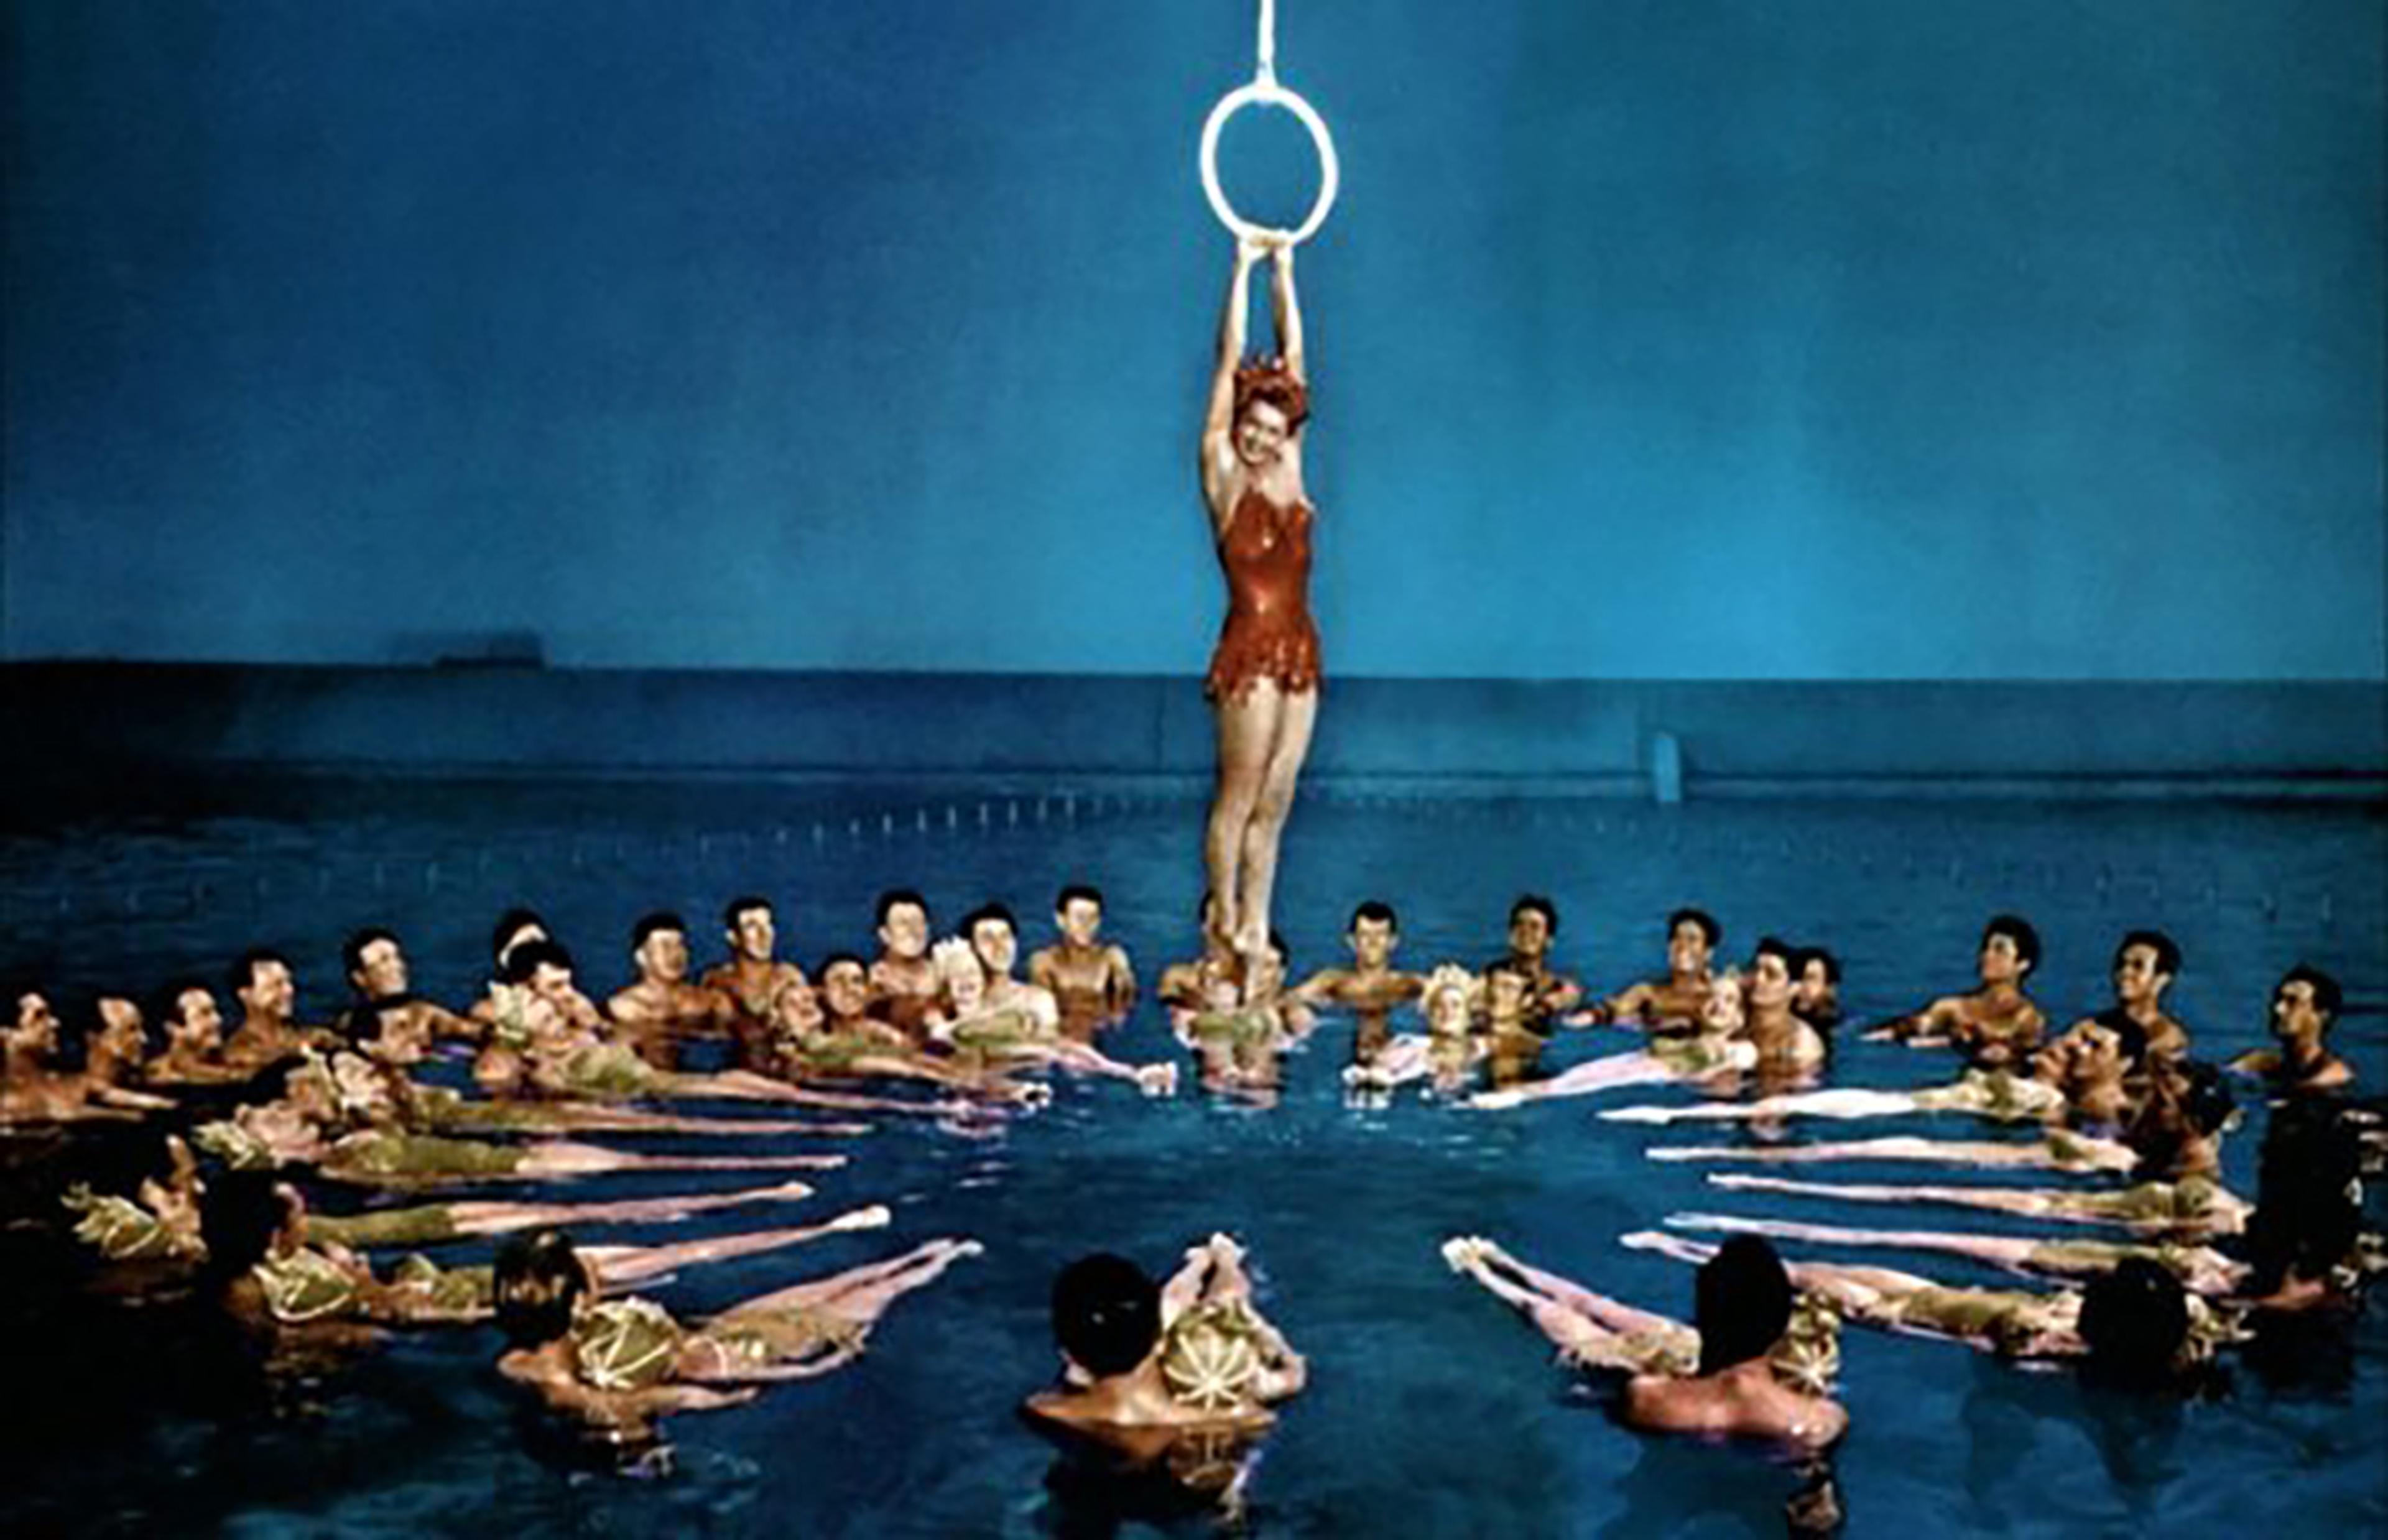 Esther Williams as Annette Kellerman in a Busby Berkeley choregraphed aquatic sequence